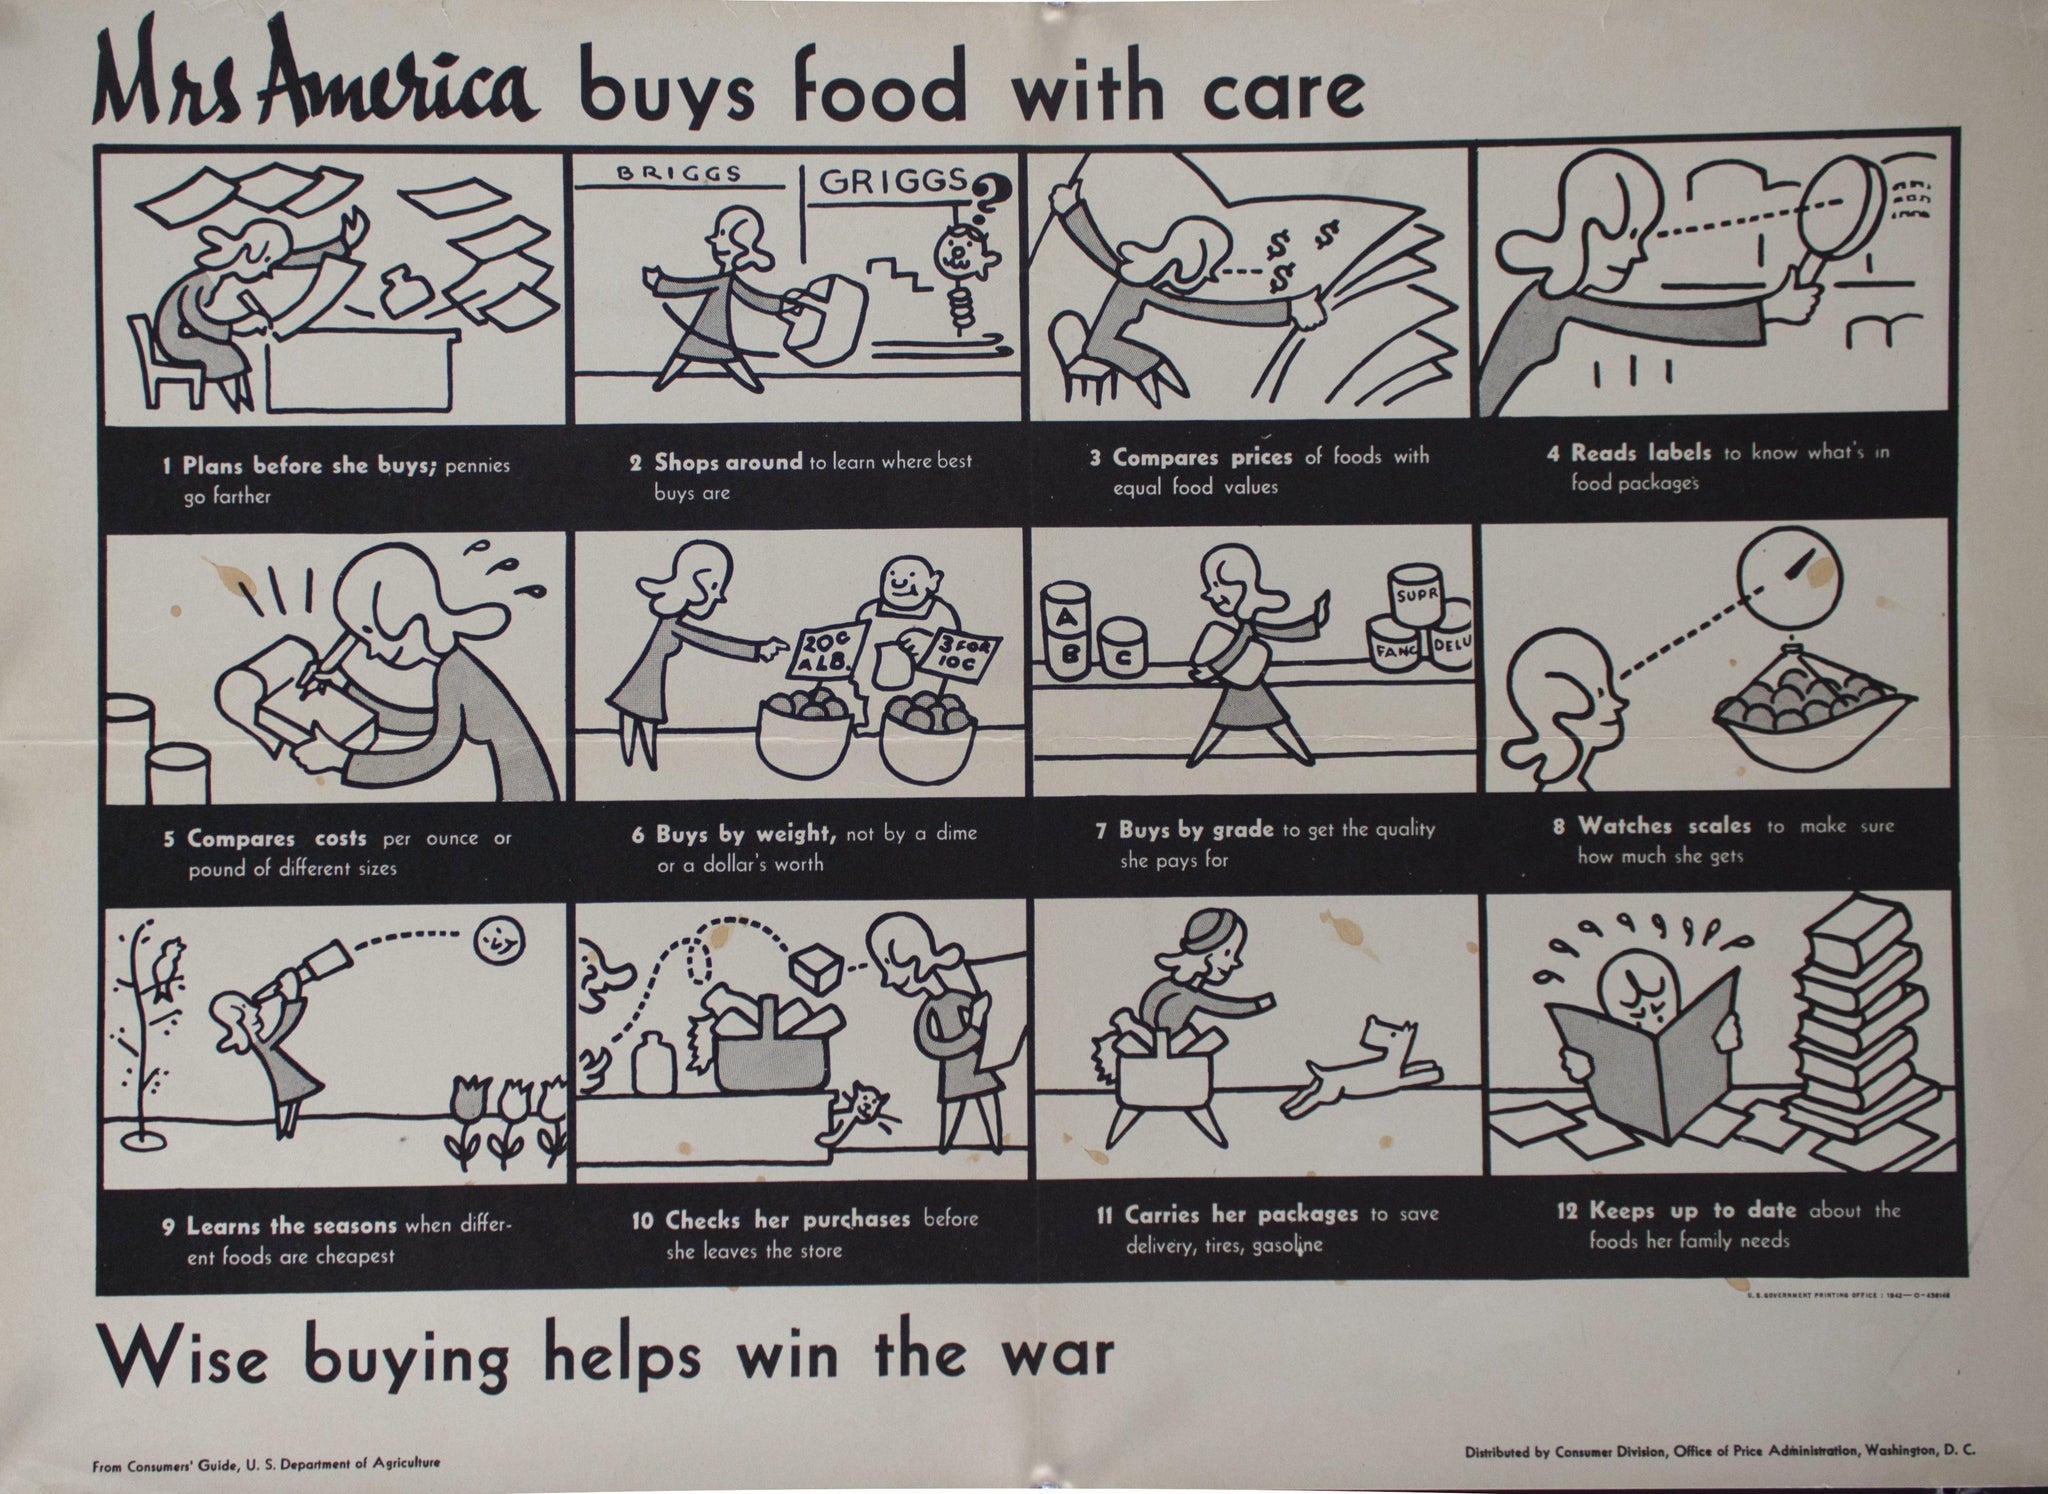 1942 Mrs America Buys Food With Care - Wise Buying Helps Win the War - Golden Age Posters